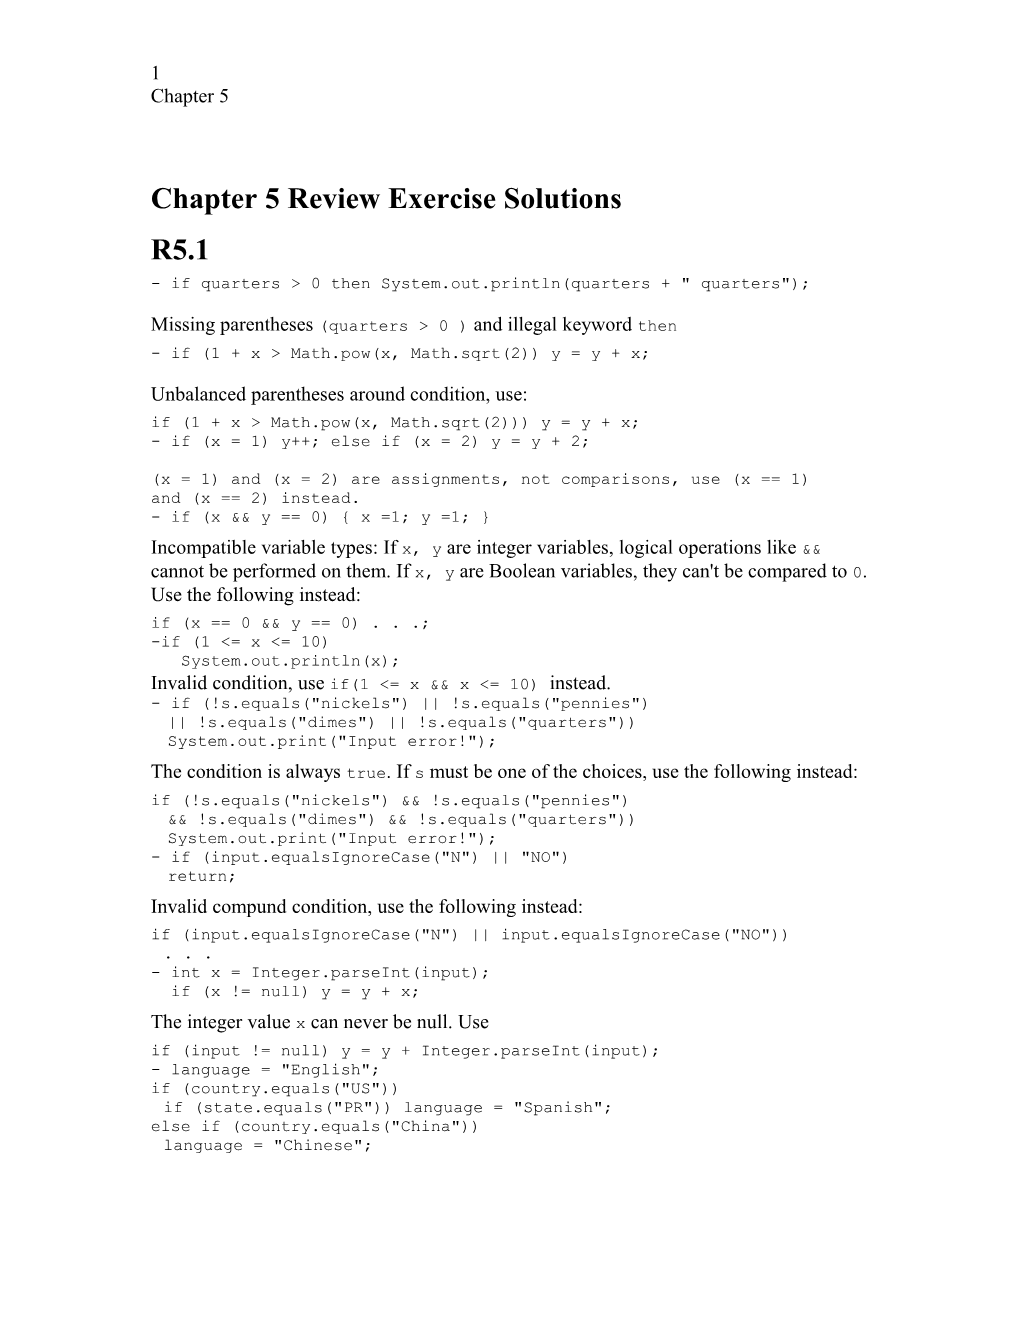 Chapter 5 Review Exercise Solutions